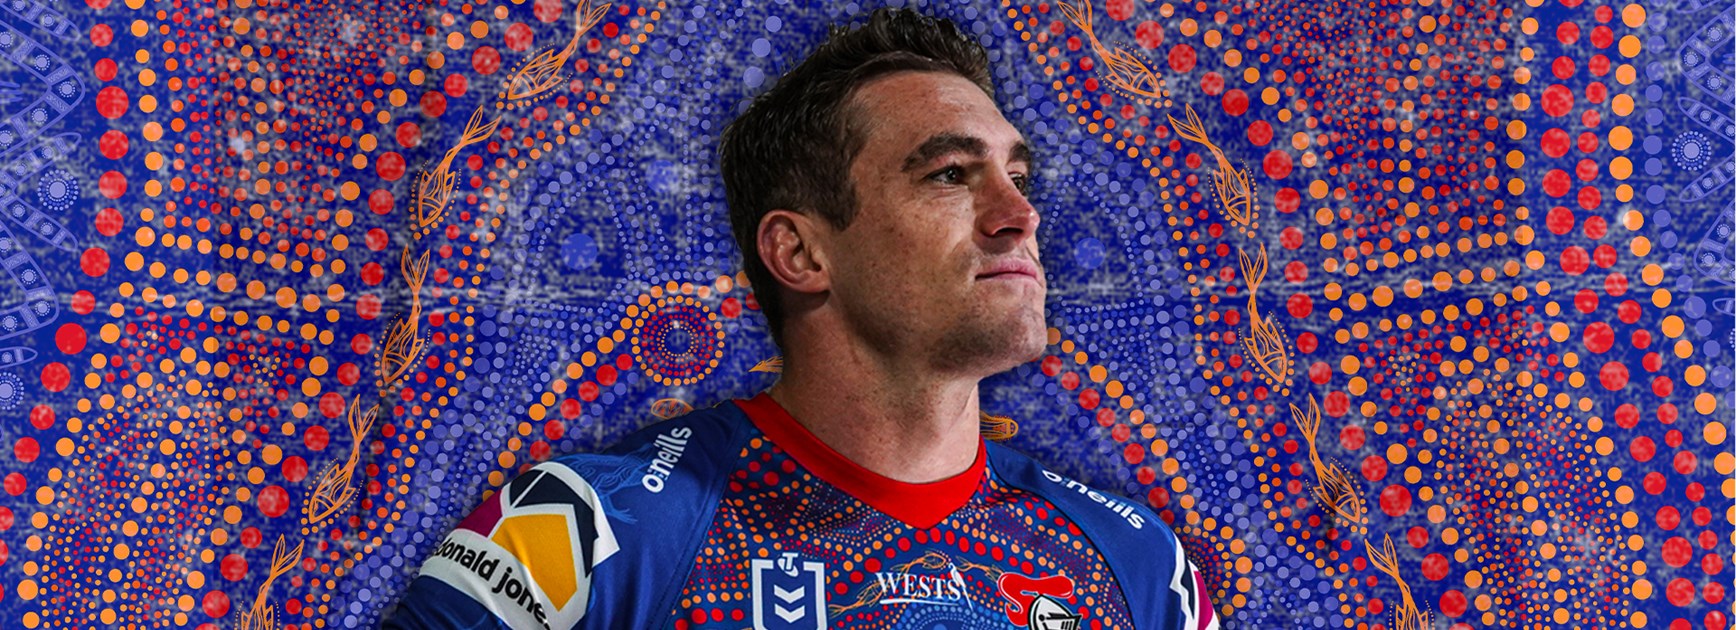 Story behind Knights 2021 Indigenous jersey